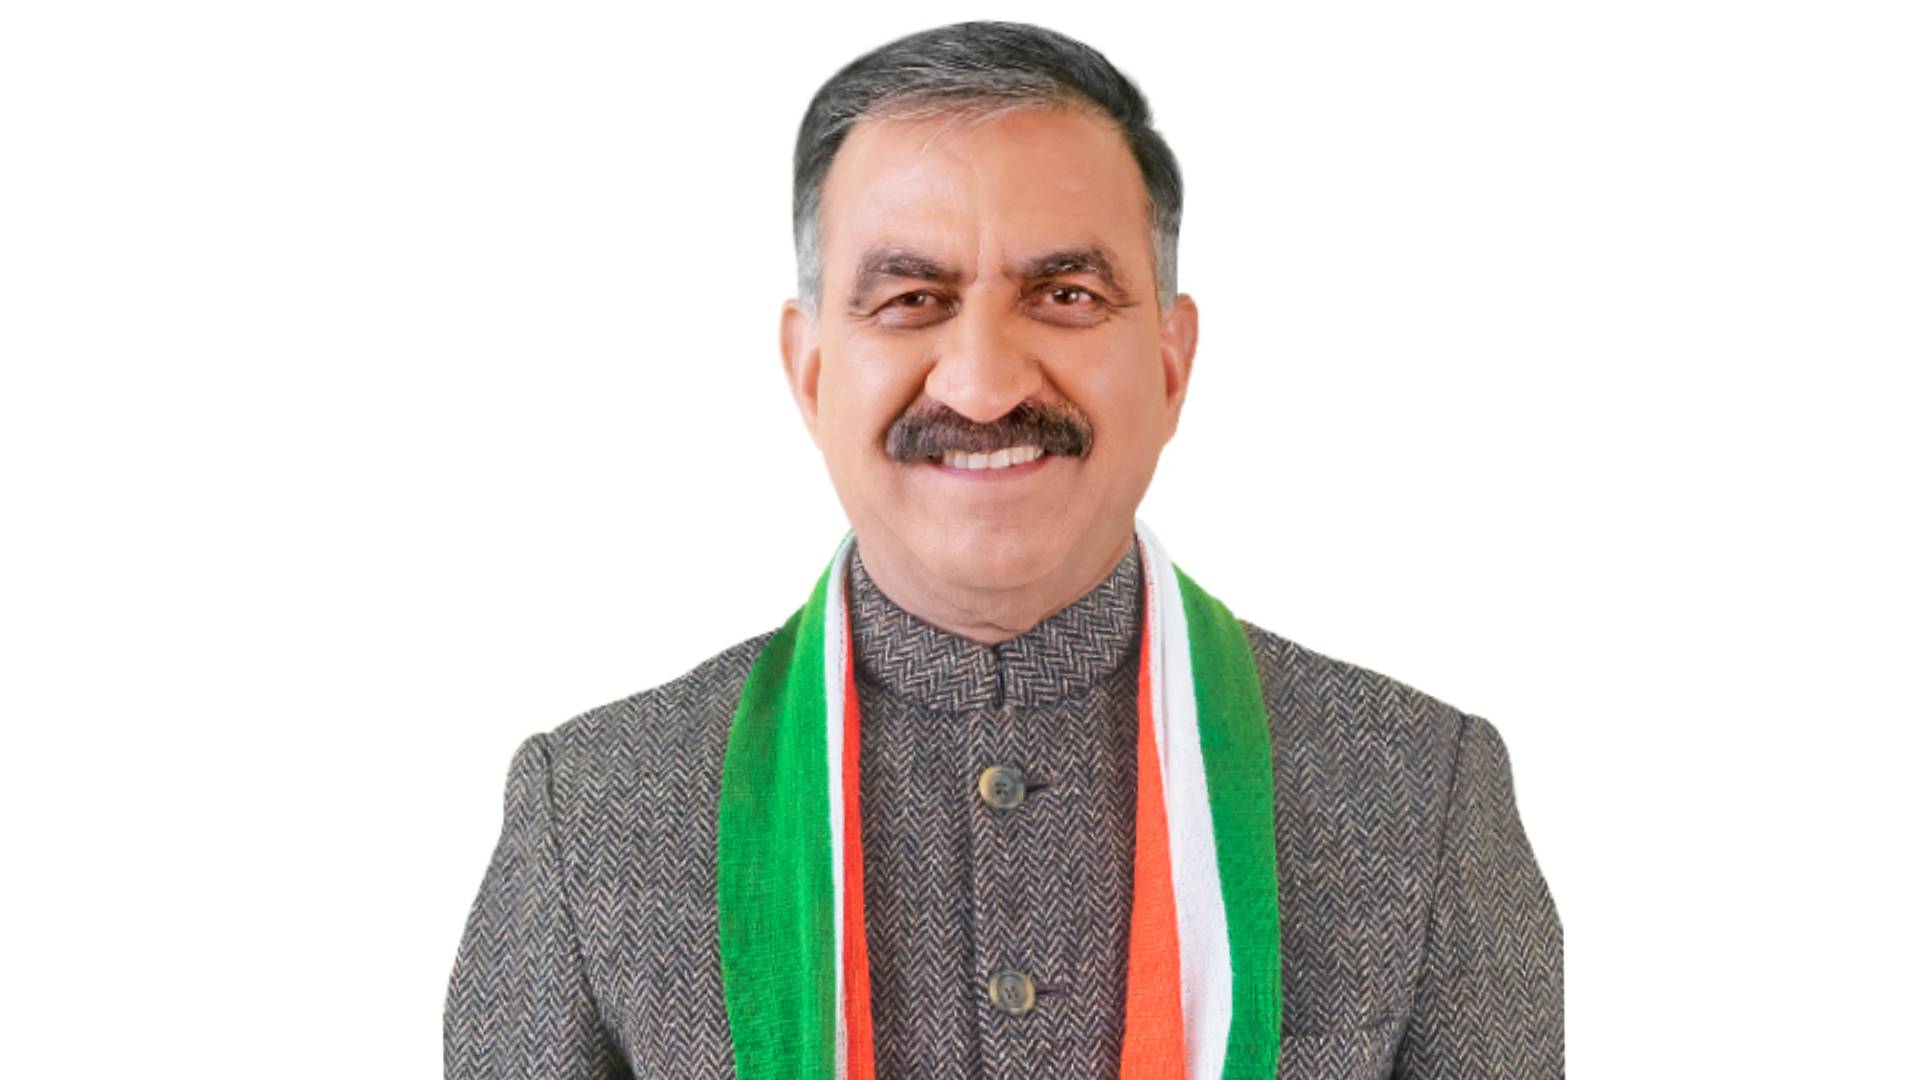 Youth losing interest in joining Army due to Agniveer scheme: CM Sukhu